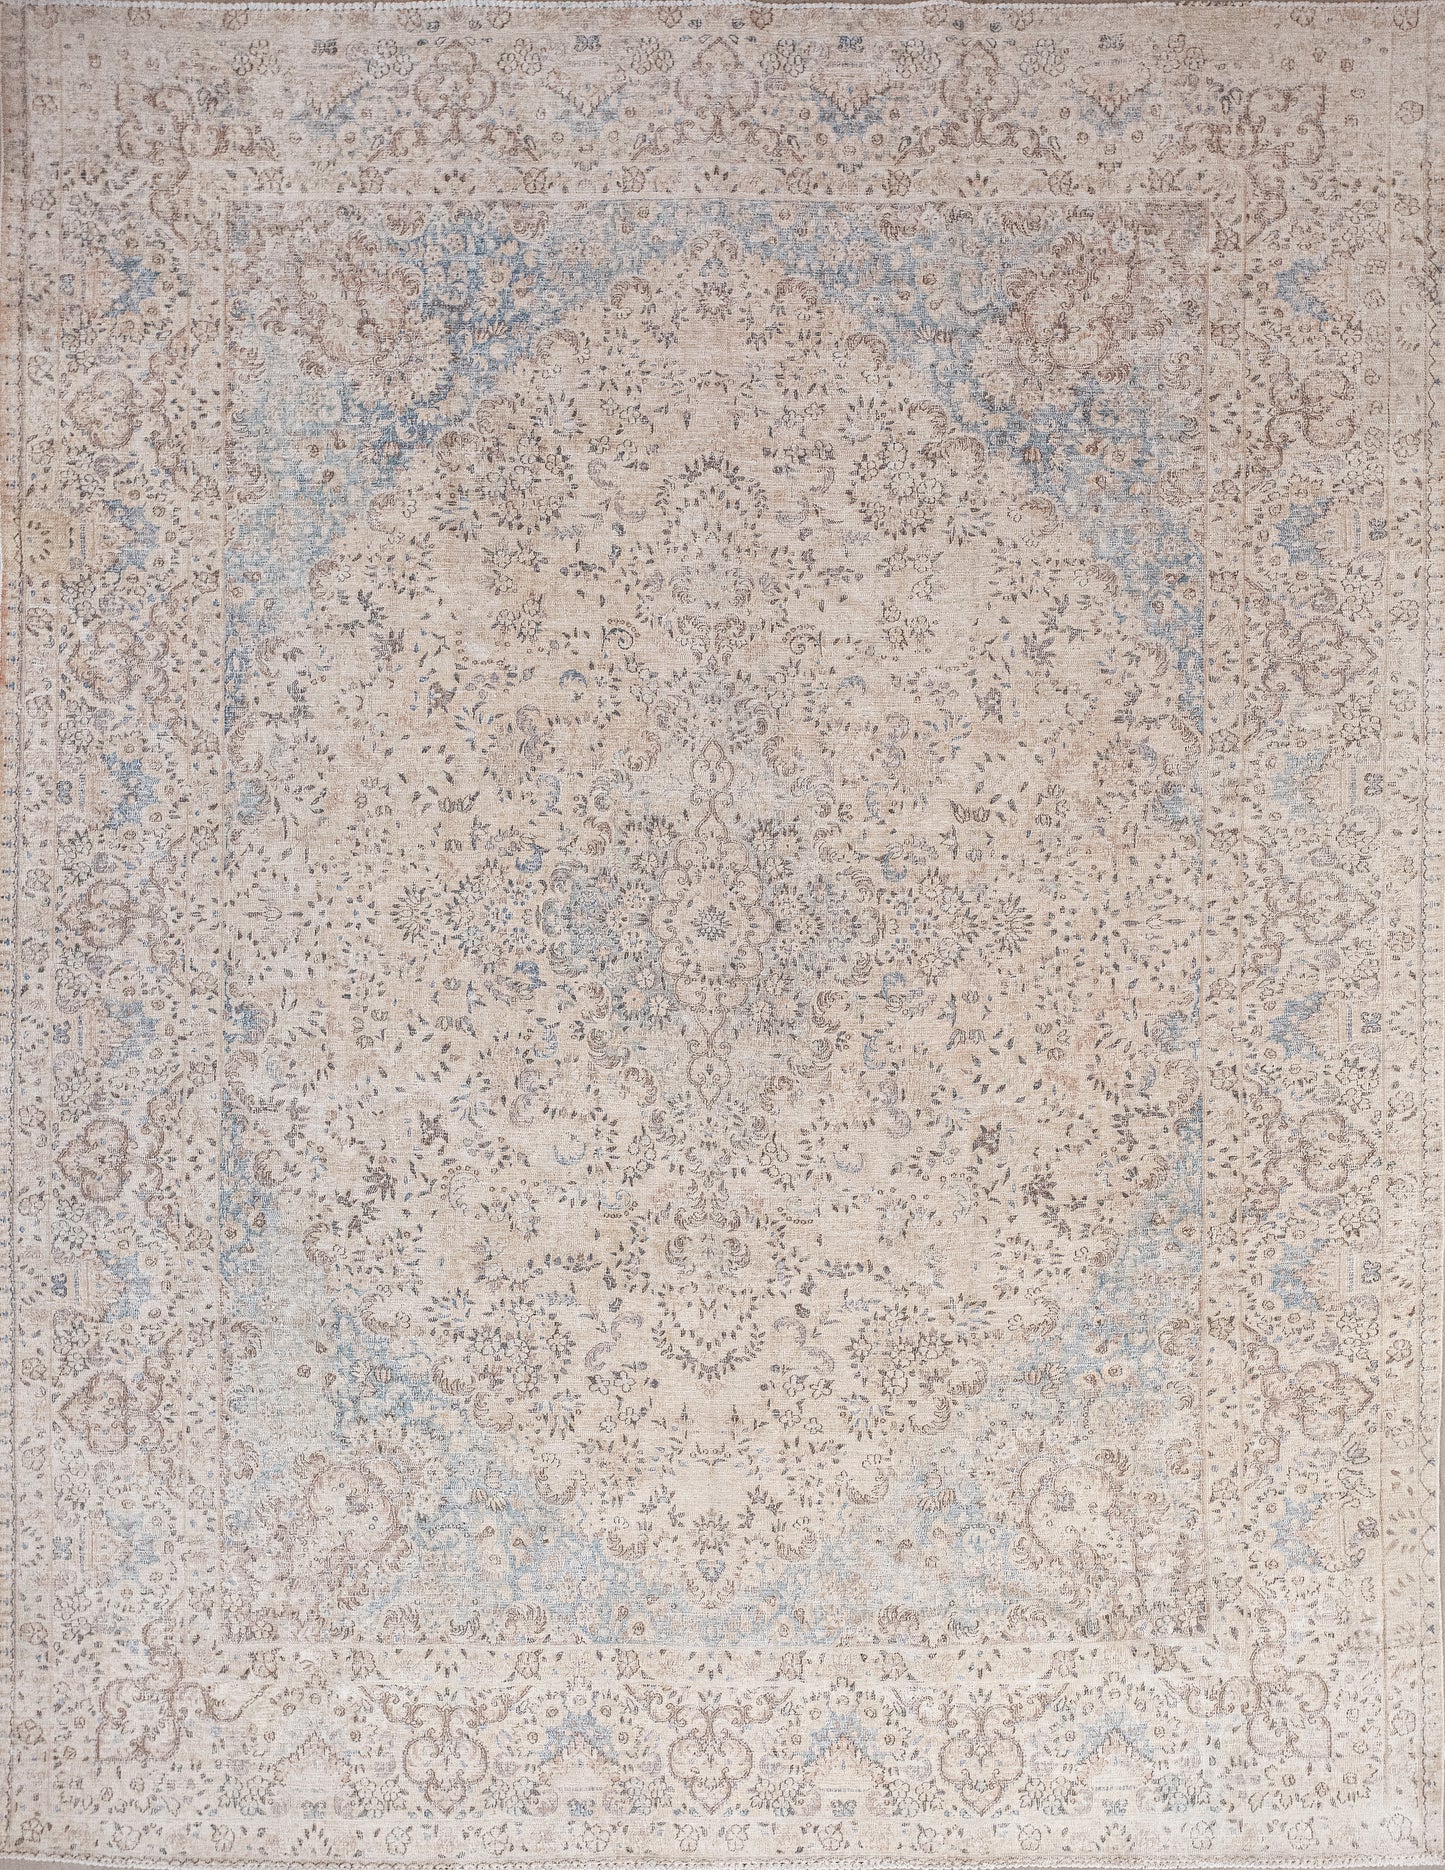 This old-fashioned rug was woven with an air of distinction. The color palette has browns and blues ranging from light to dark tones.